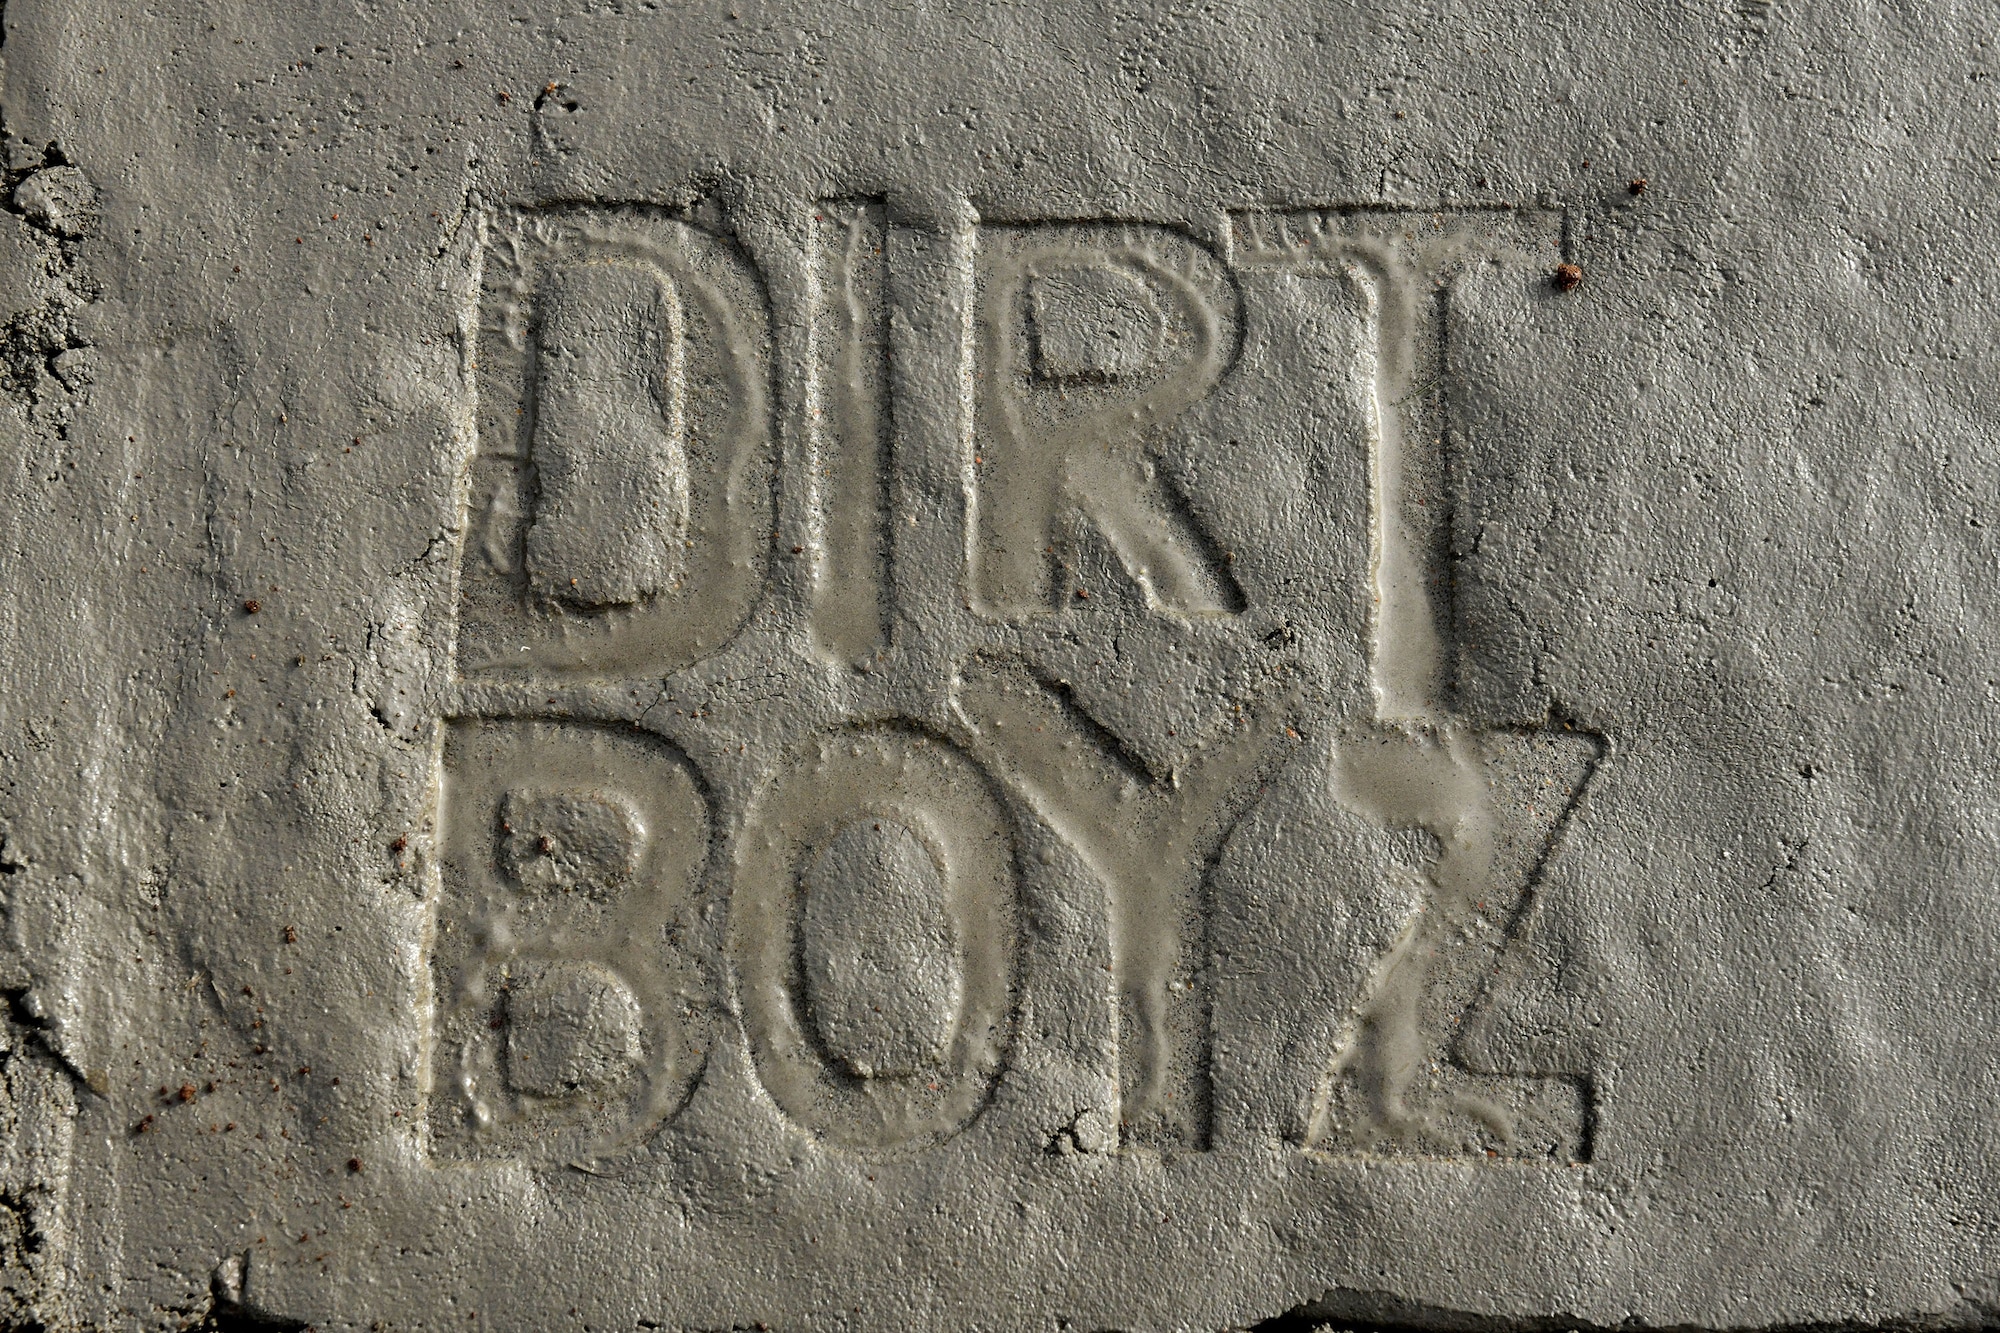 Stamped into fresh concrete, the “Dirt Boyz” emblem marks the foundation of a new frangible flood gate being constructed by 97th Civil Engineer Squadron (CES) at Altus Air Force Base, Oklahoma, Dec. 9, 2021. One of the missions of the 97 CES is to support the training, airlift and refueling missions of the 97th Air Mobility Wing by providing facilities and infrastructure such as these new flood gates. (U.S. Air Force photo by Tech. Sgt. Robert Sizelove)